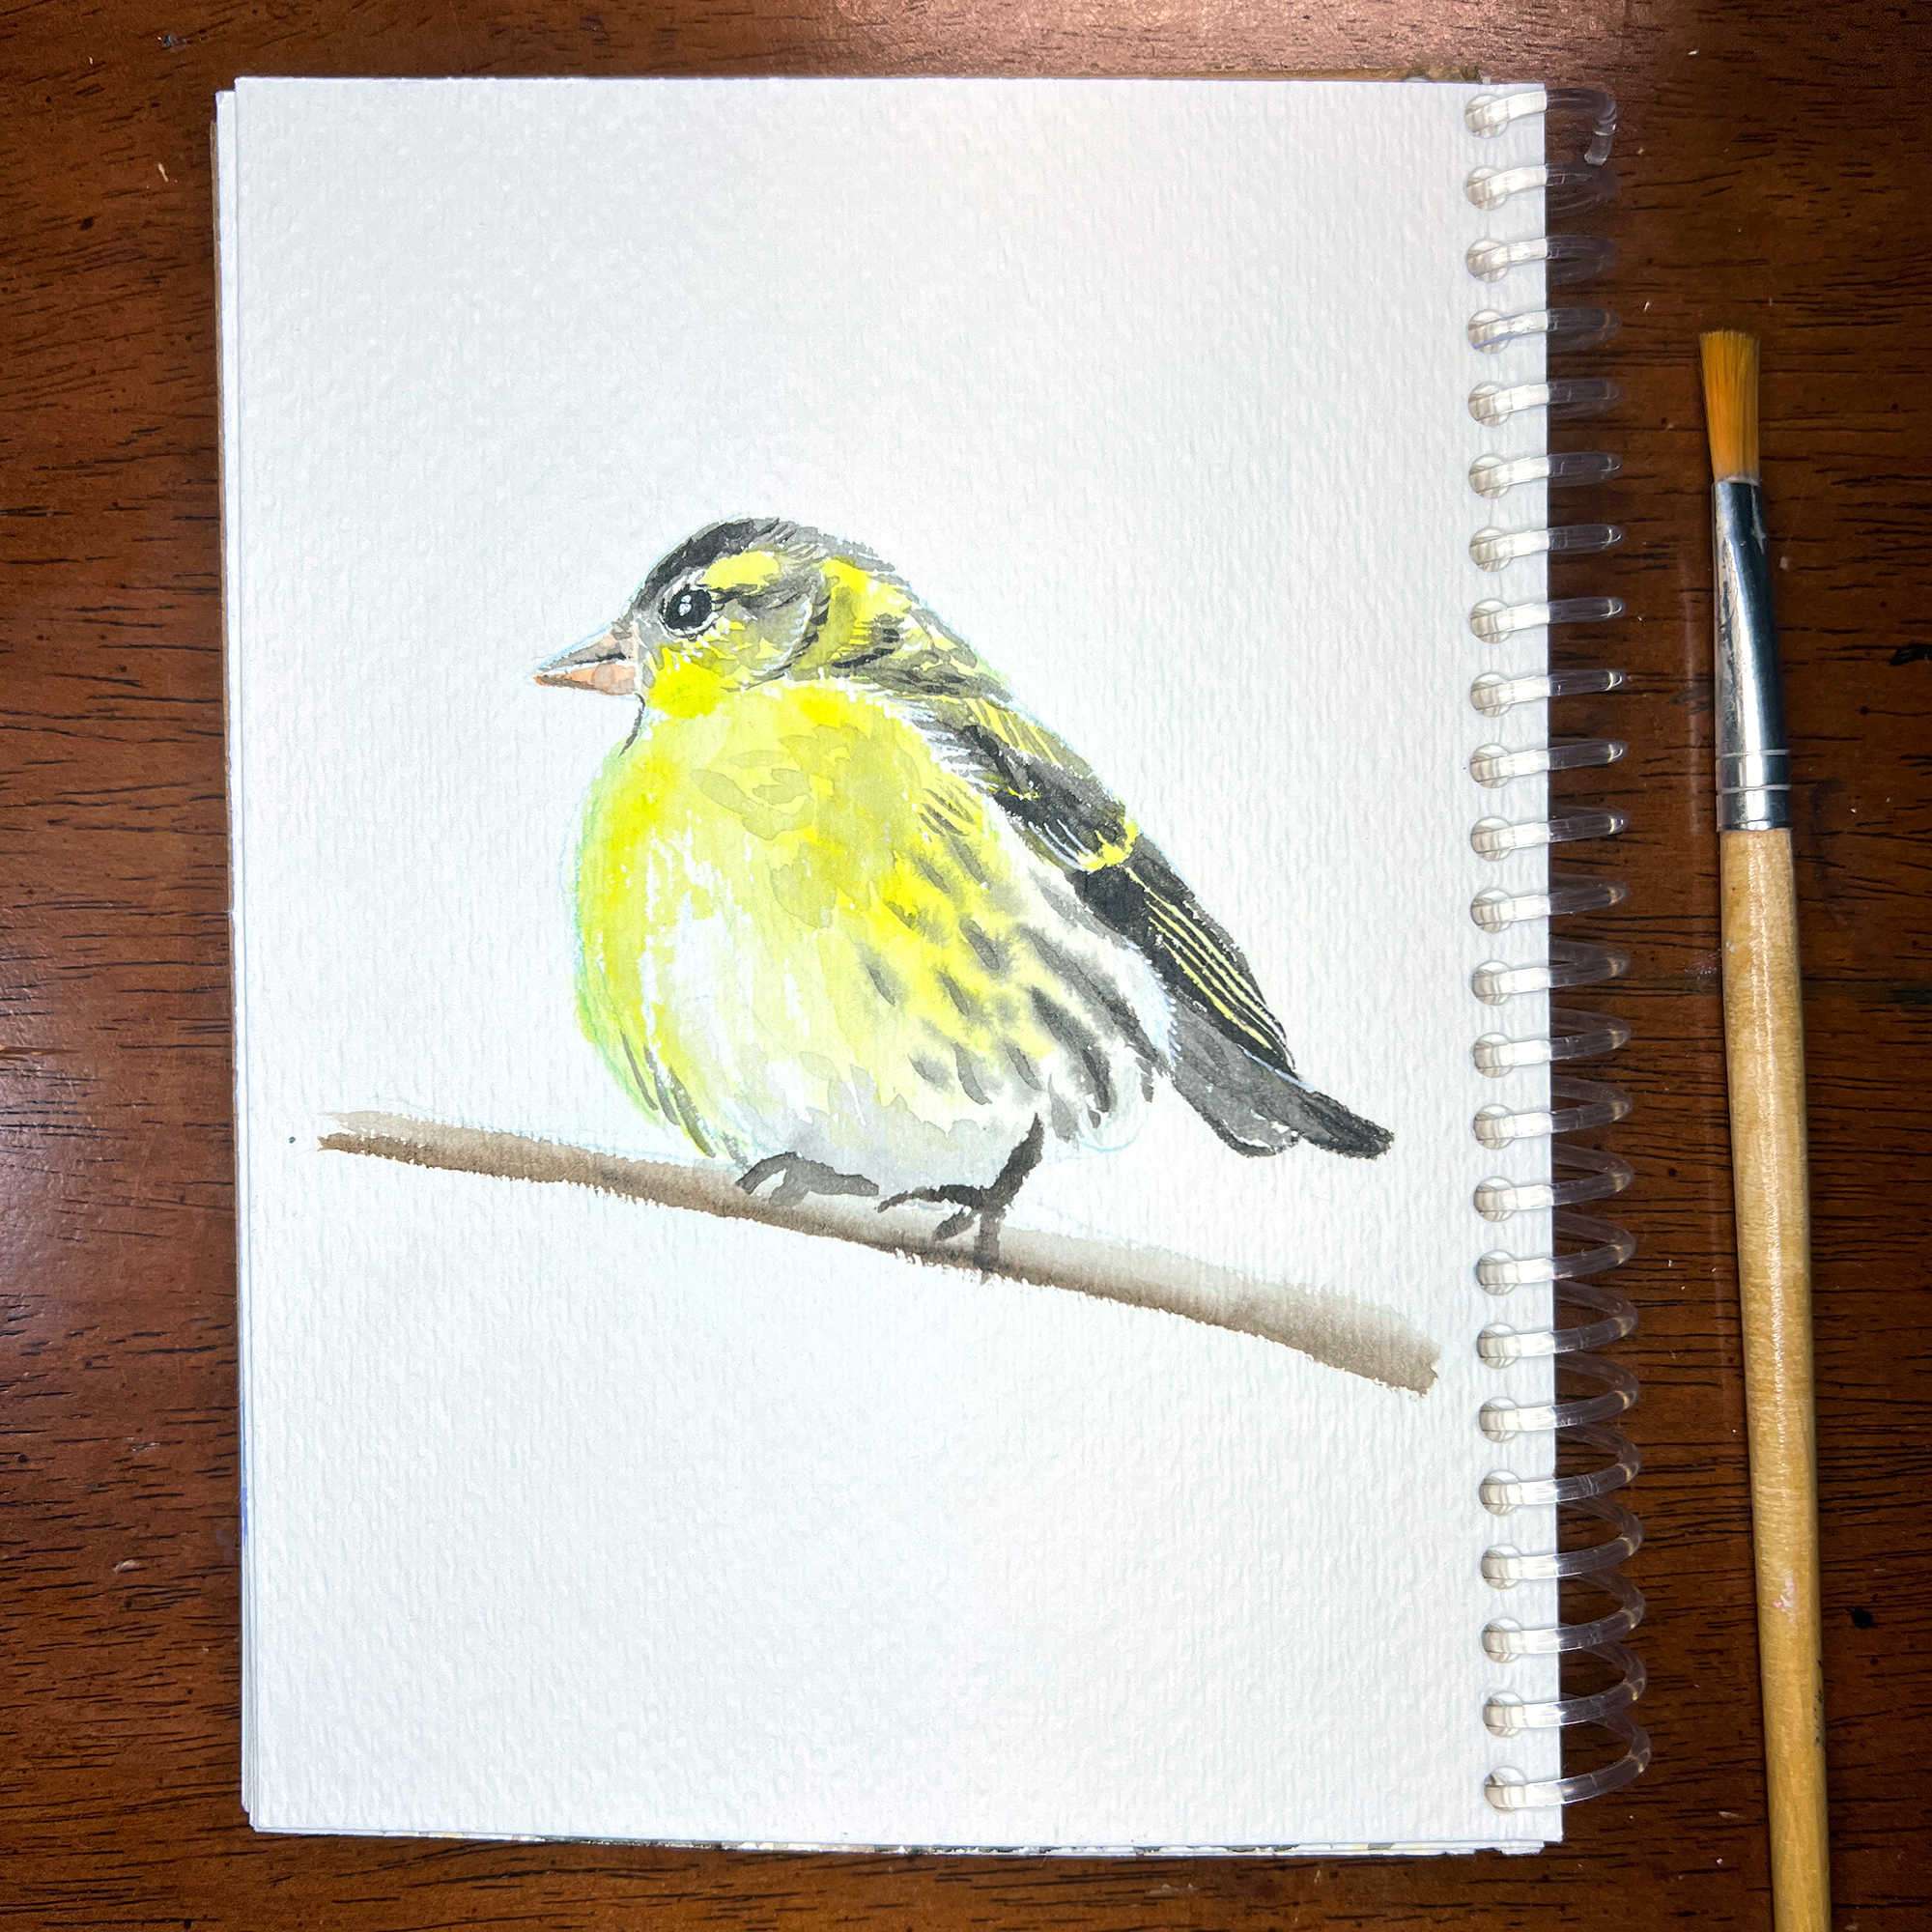 Watercolor sketch of a cheerful goldfinch on a sketchpad next to a paintbrush for size reference